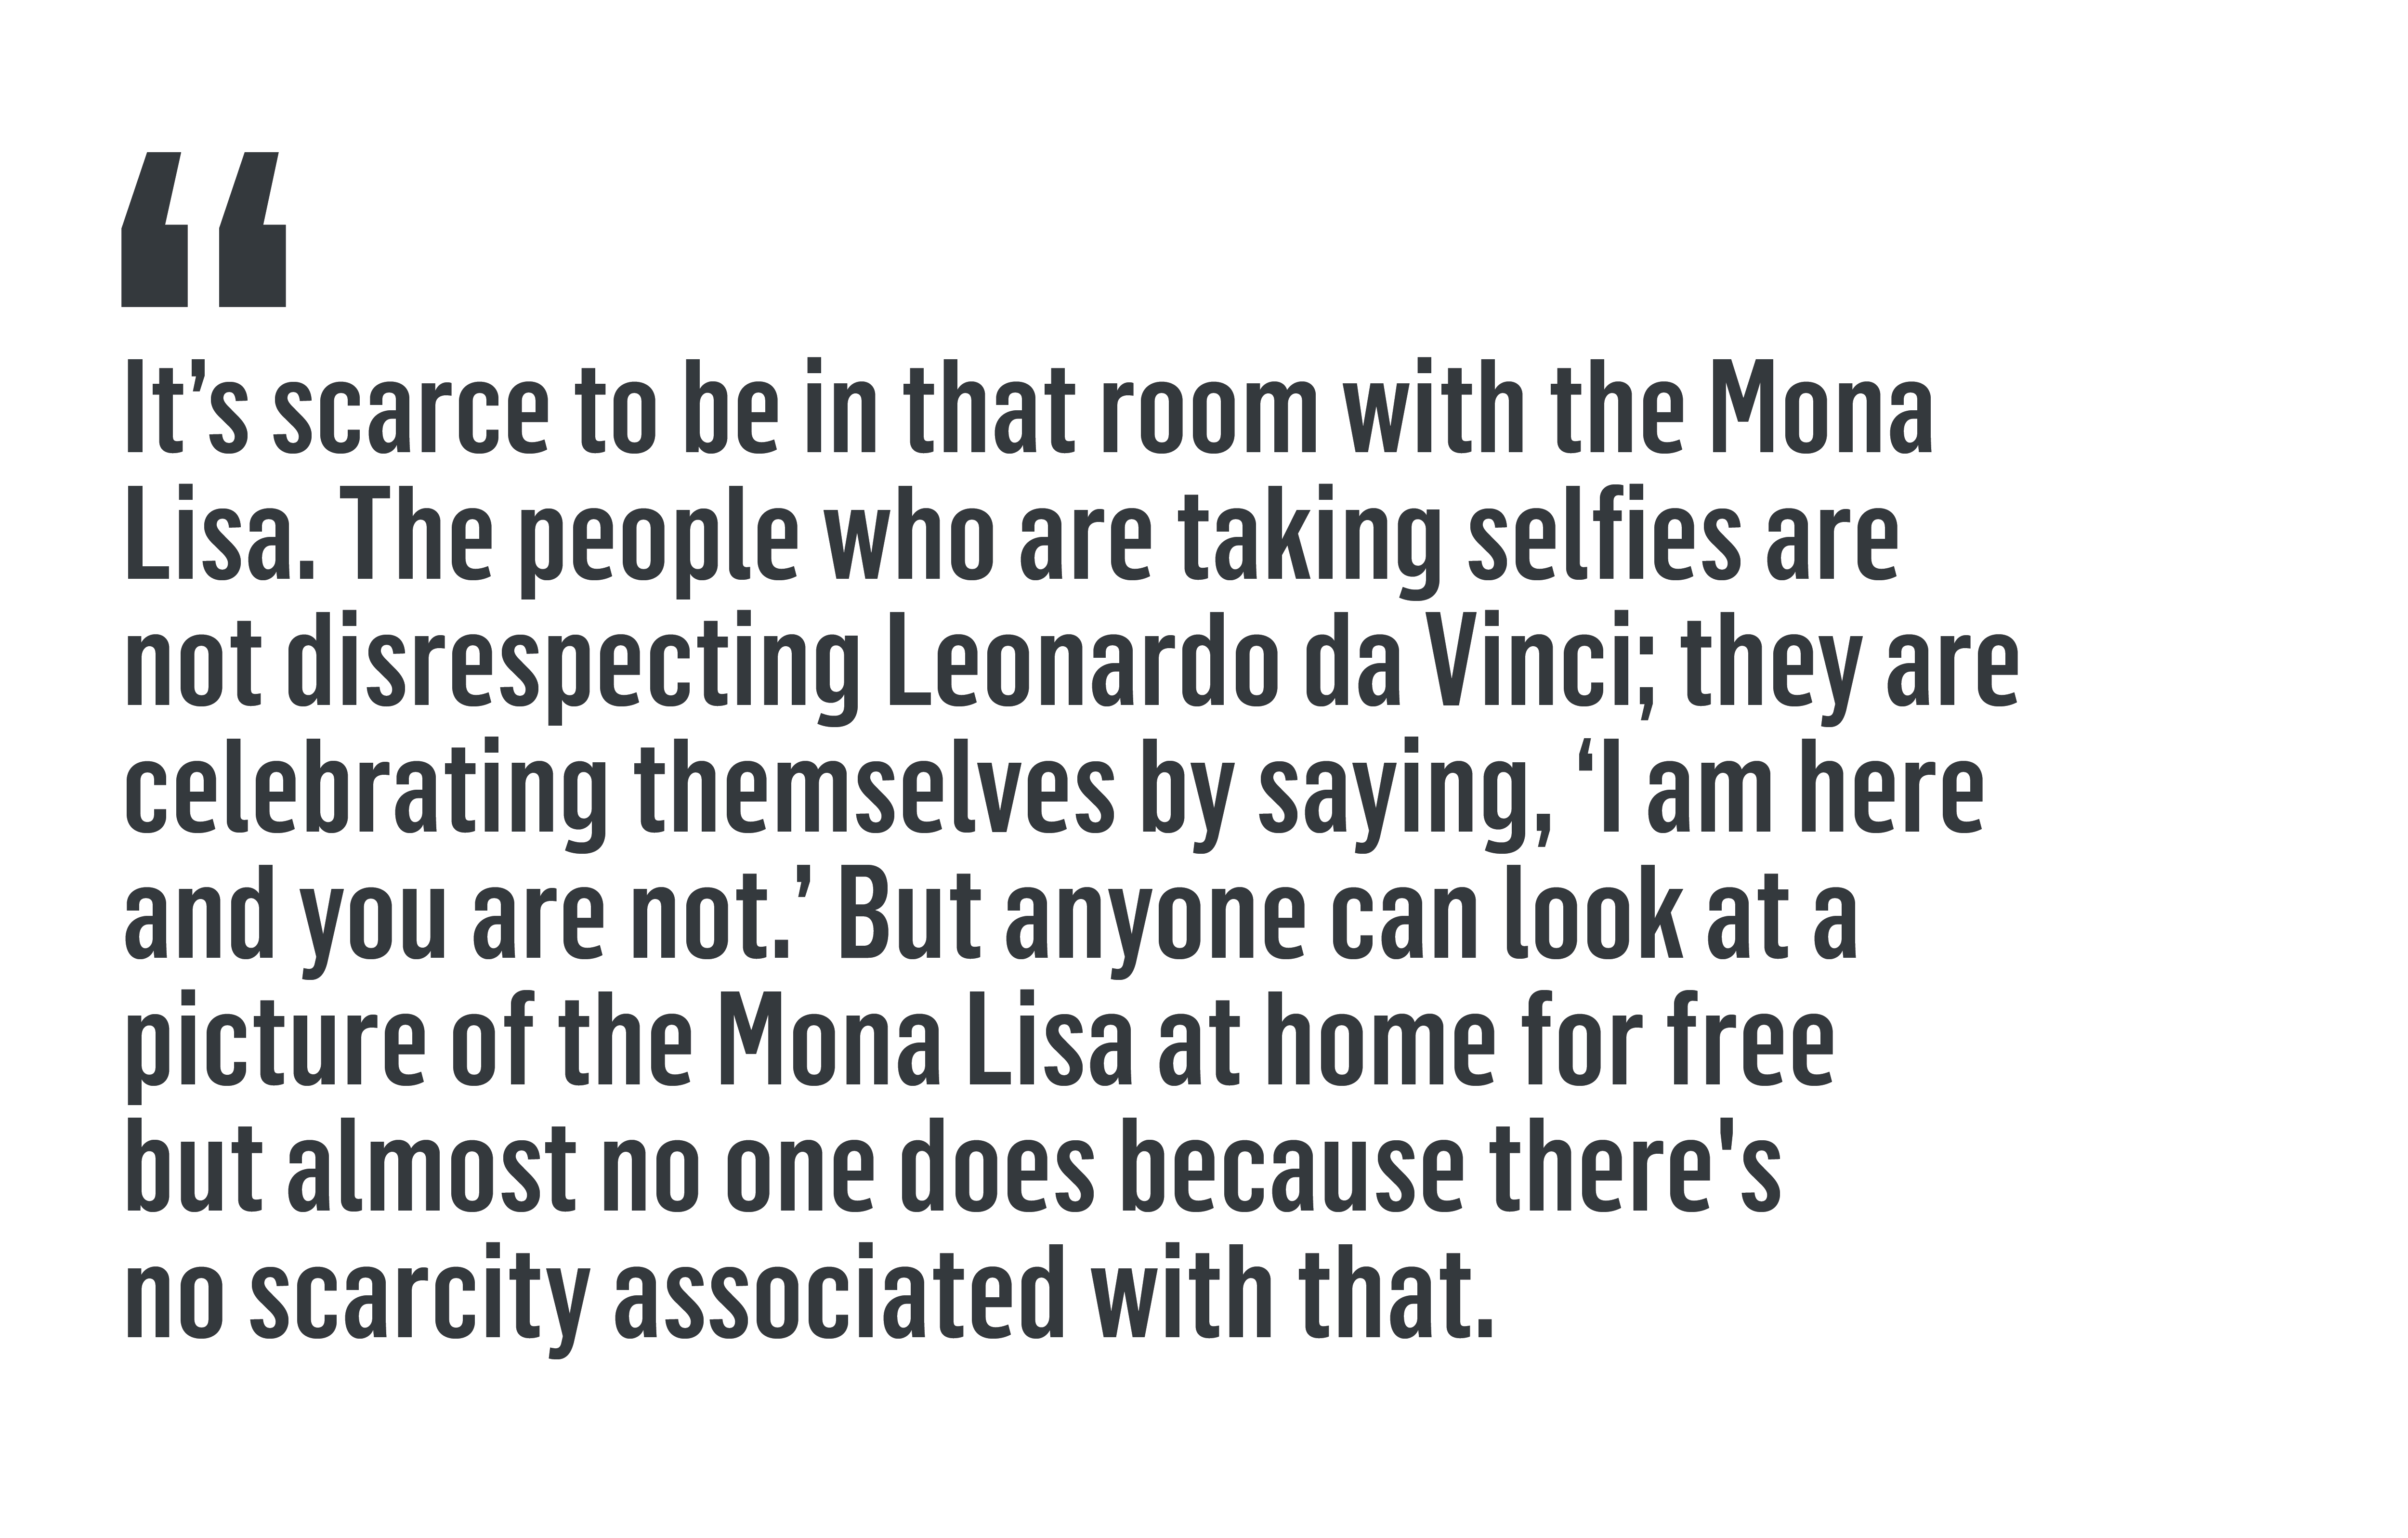 “It’s scarce to be in that room with the Mona Lisa. The people who are taking selfies are not disrespecting Leonardo da Vinci; they are celebrating themselves by saying, 'I am here and you are not.' But anyone can look at a picture of the Mona Lisa at home for free but almost no one does because there's no scarcity associated with that.”